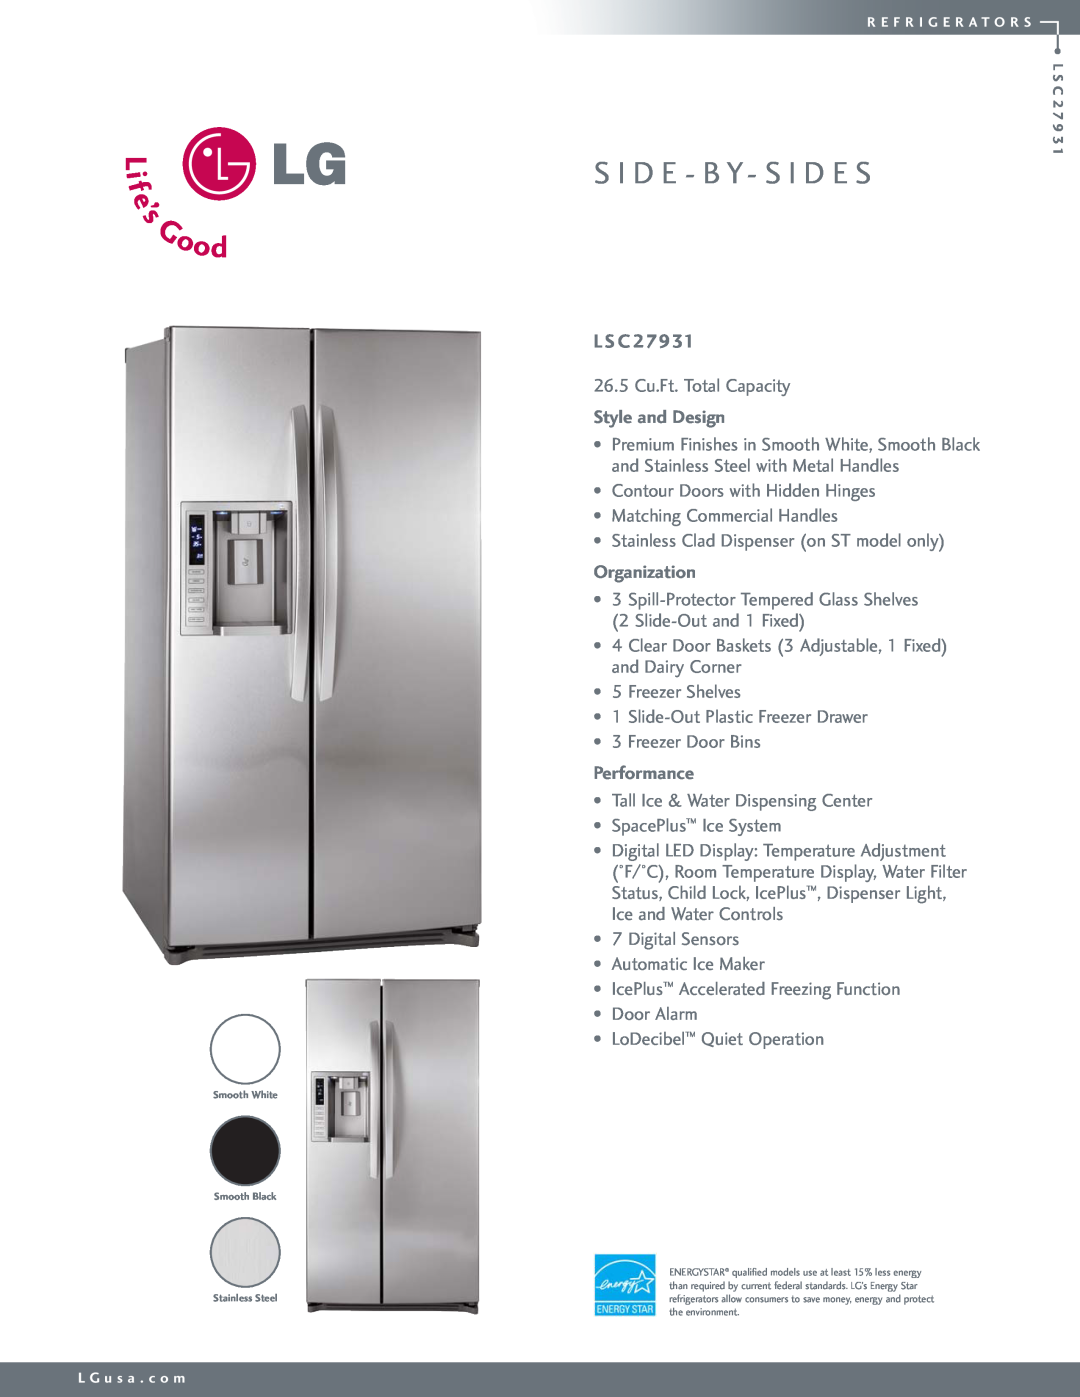 LG Electronics LSC27931SW manual L S C, S I D E - B Y- S I D E S, Style and Design, Organization, Performance 